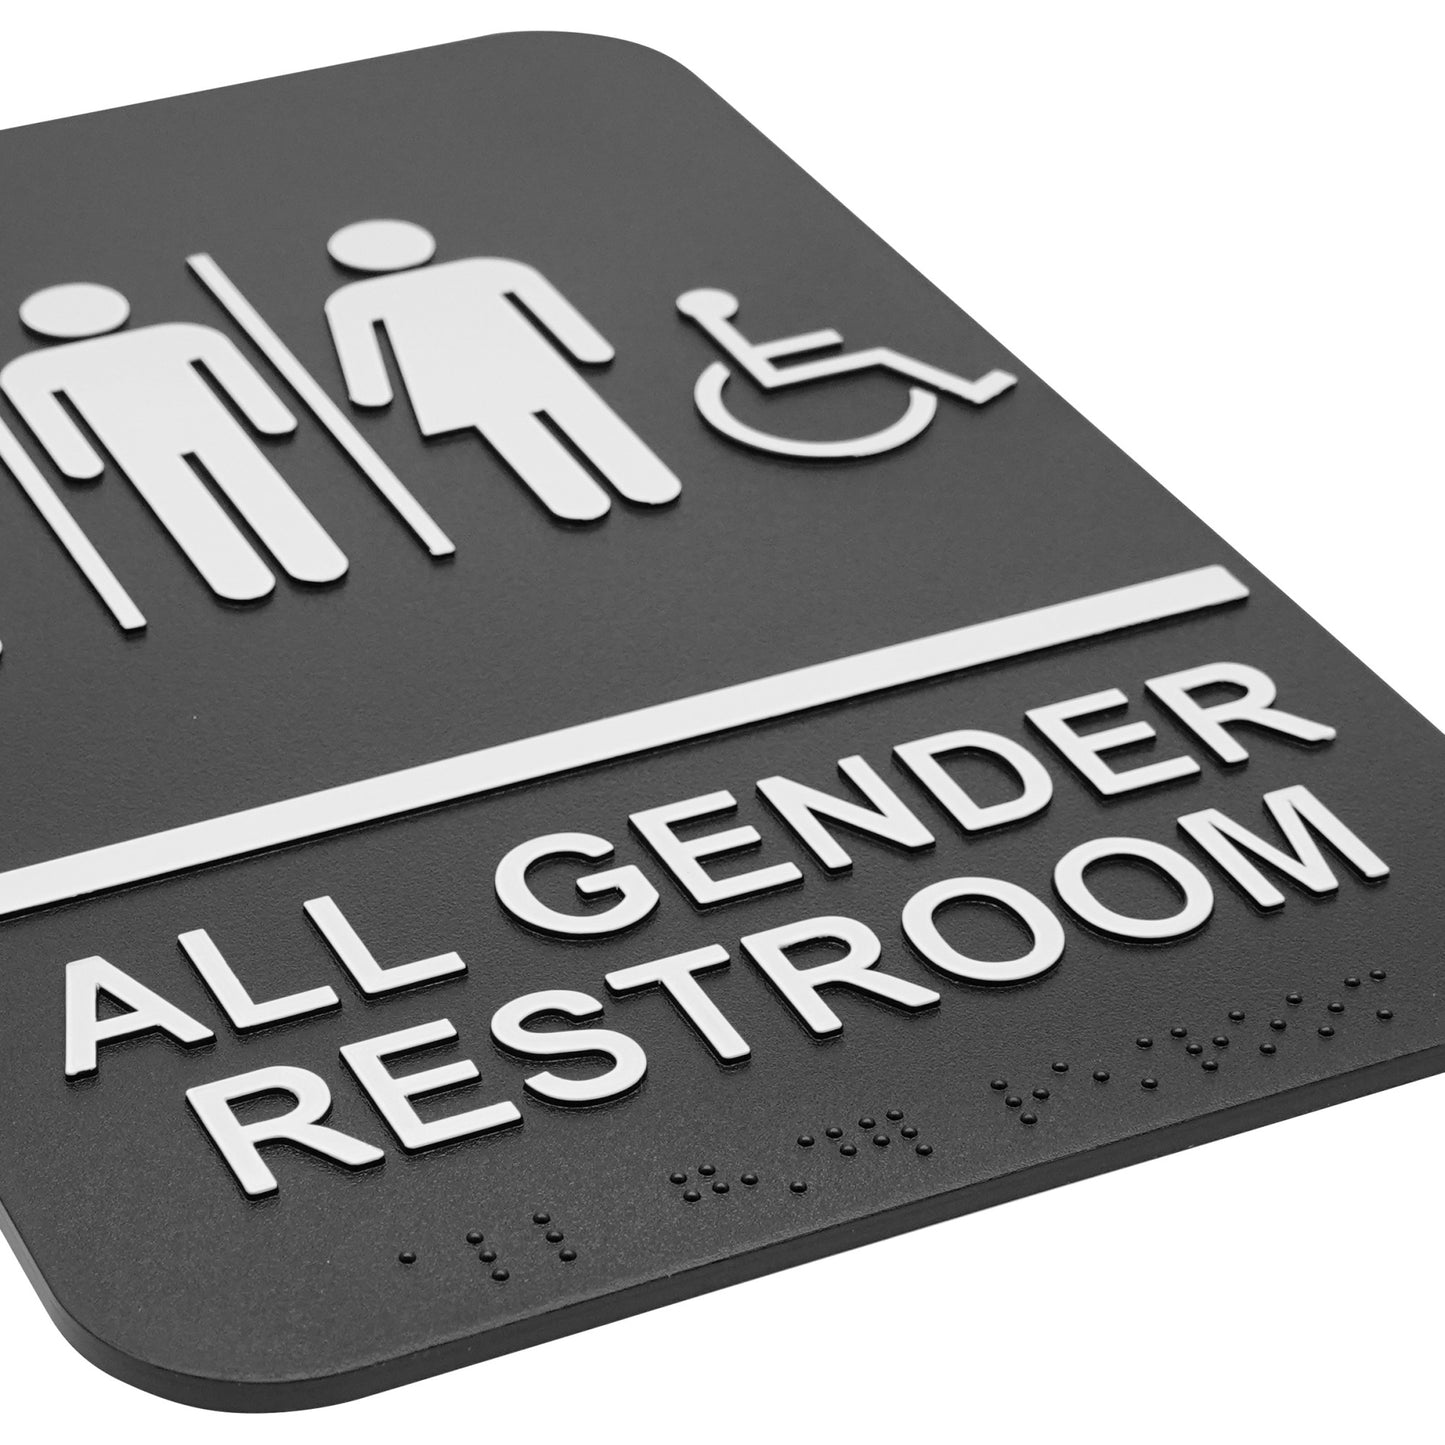 SGNB-608 - Information Signs with Braille, 6"W x 9"H - All Gender Restroom w/ Accessible